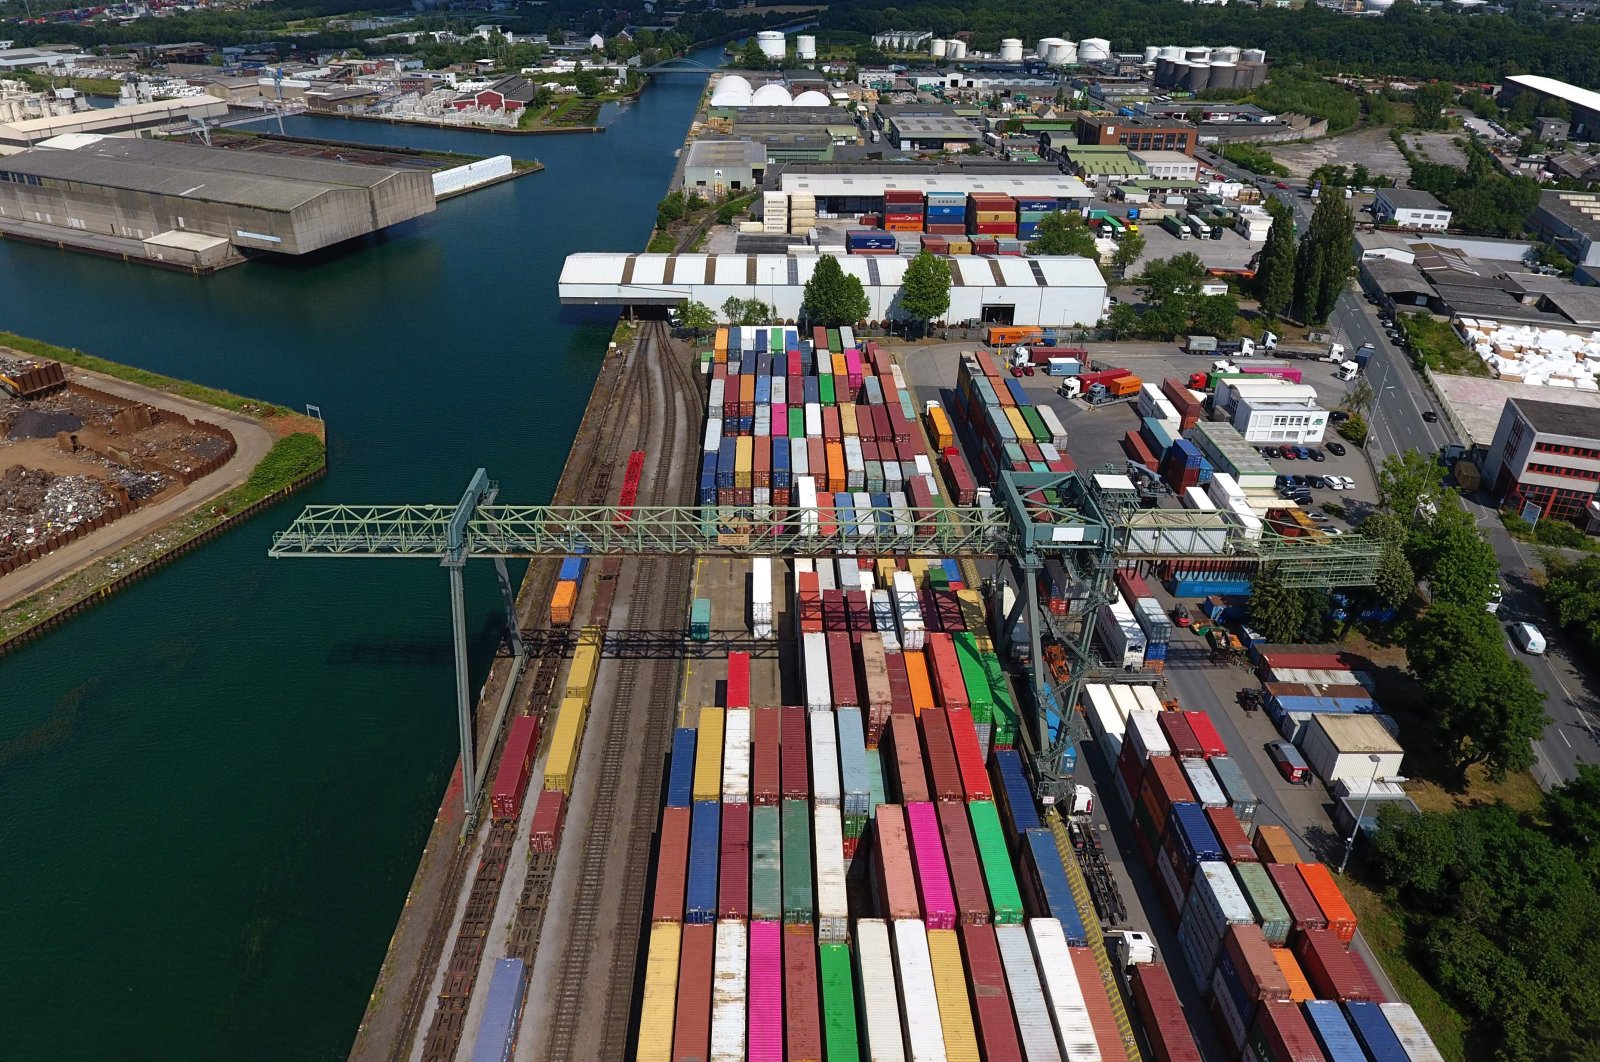 An aerial view of containers at the inland port in Dortmund, western Germany, June 24, 2019. (AFP Photo)